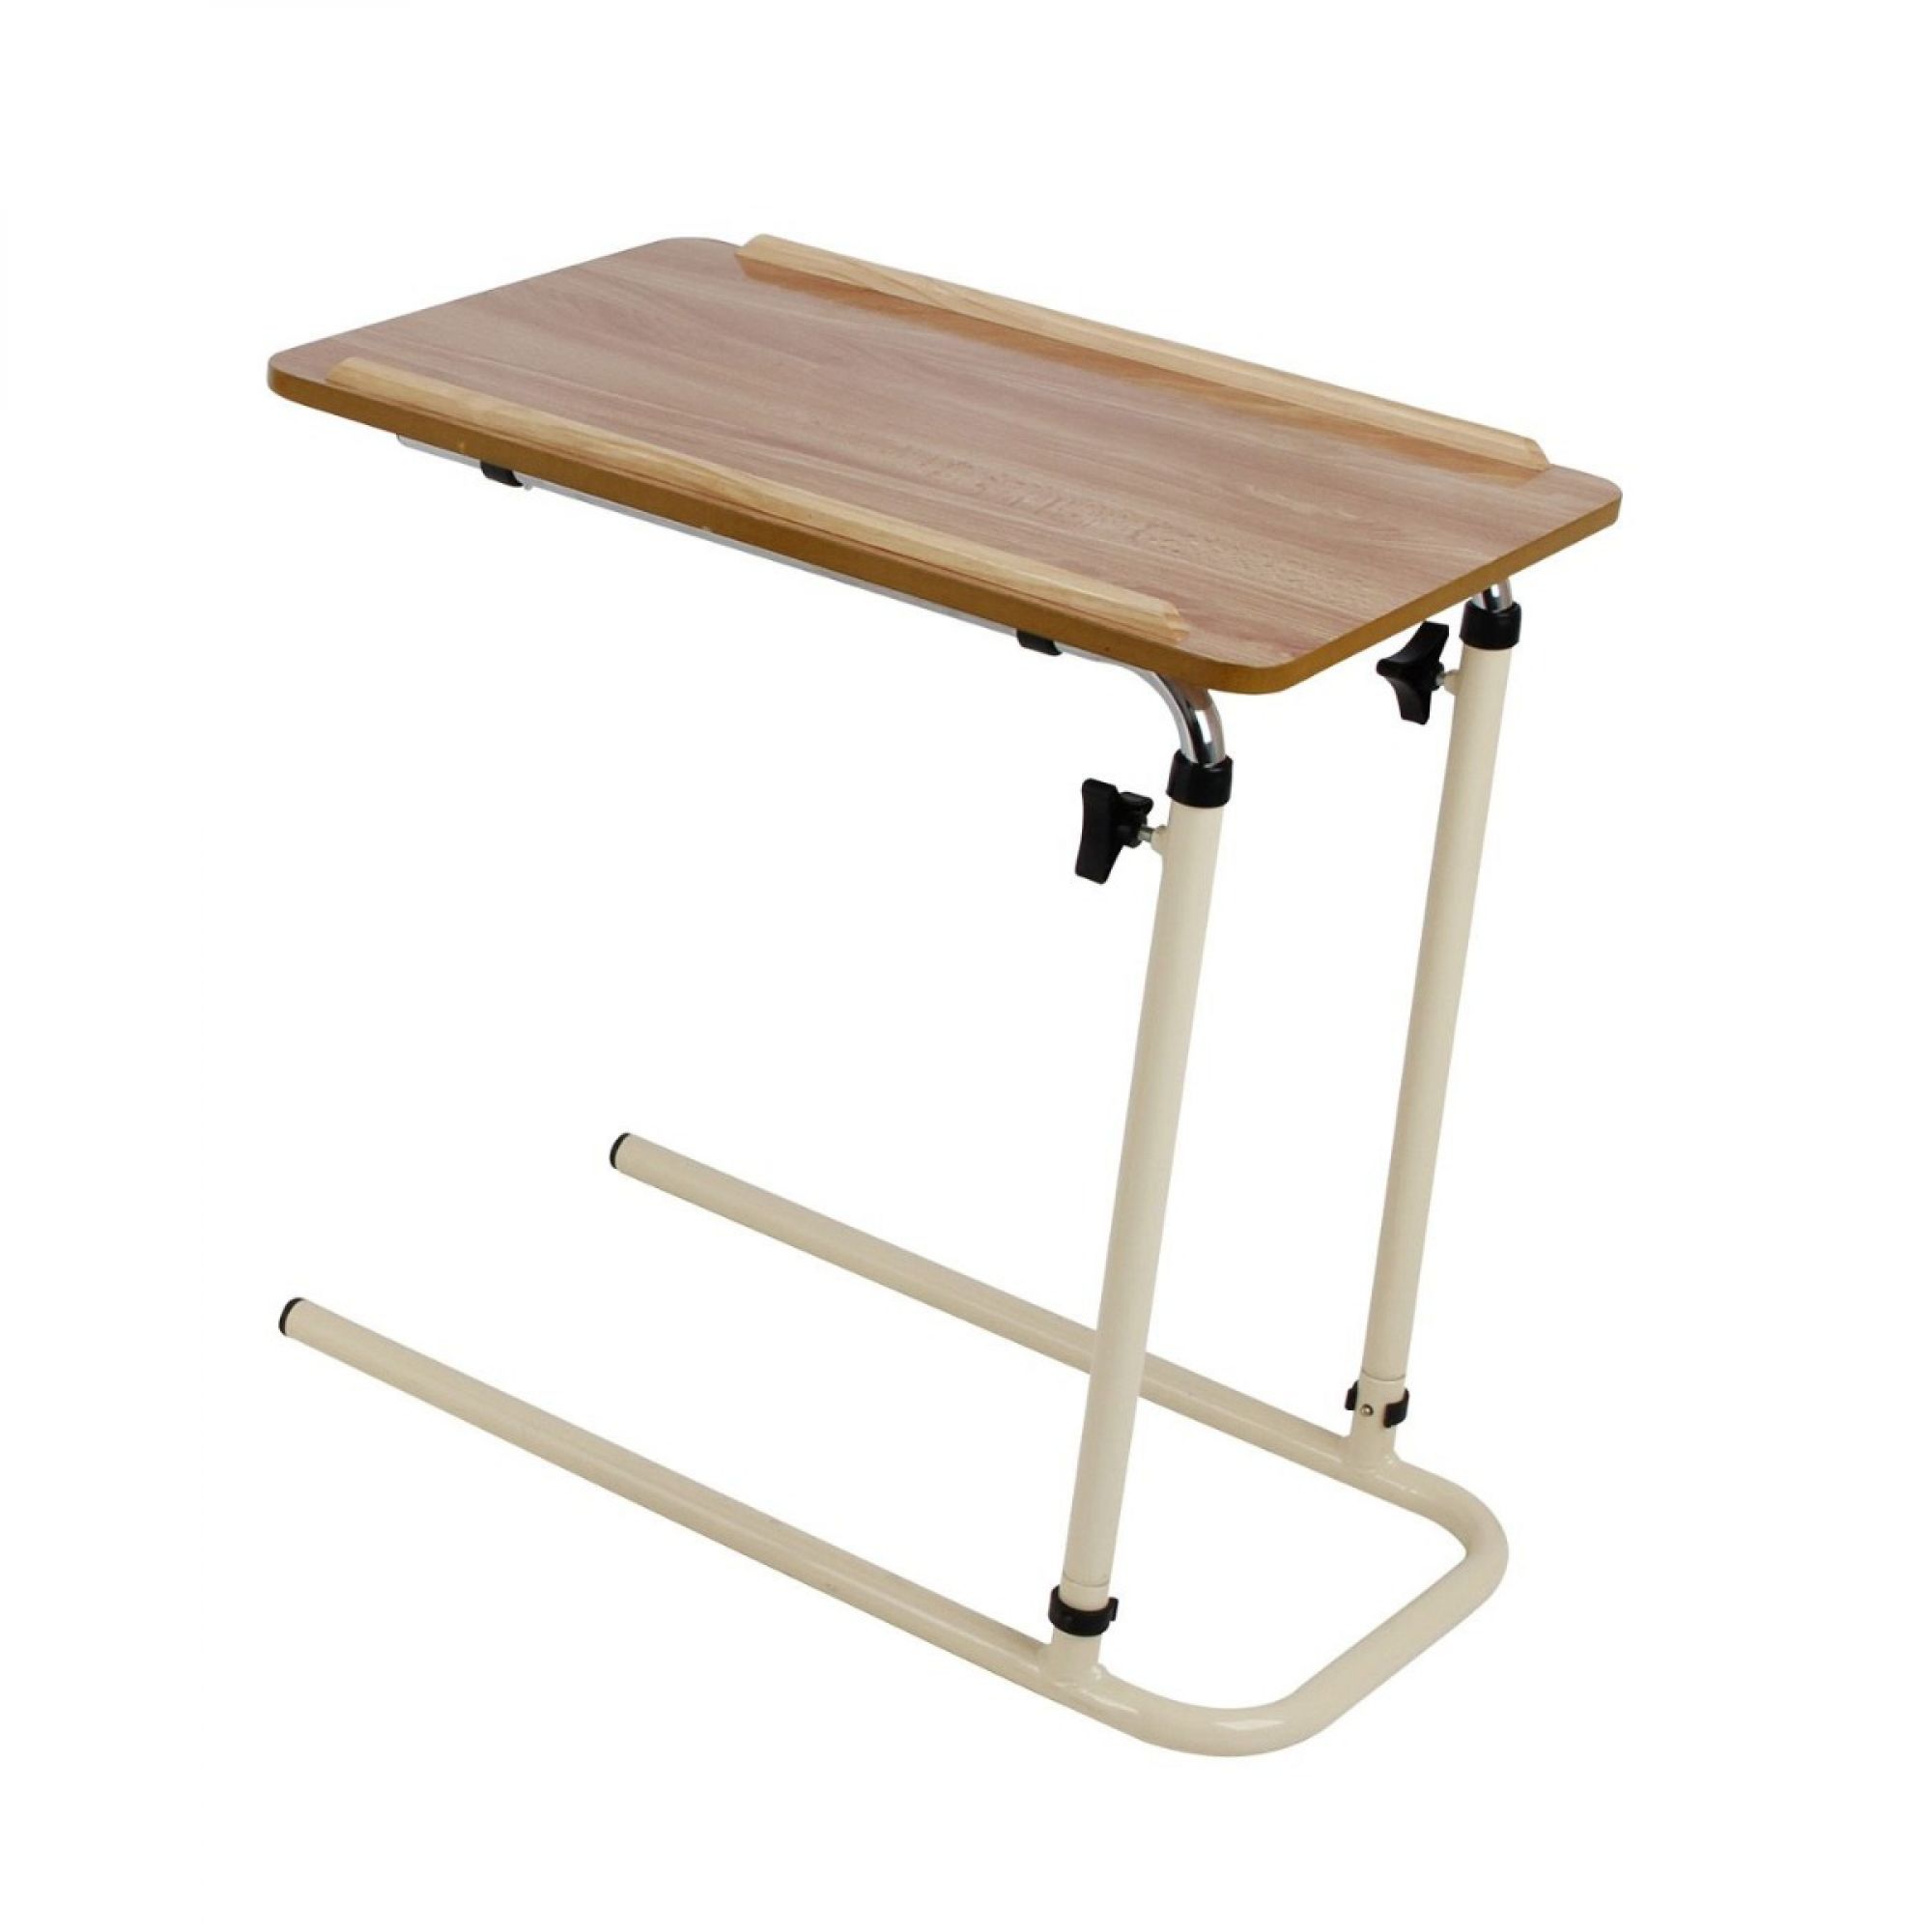 Over-Bed Table without castors